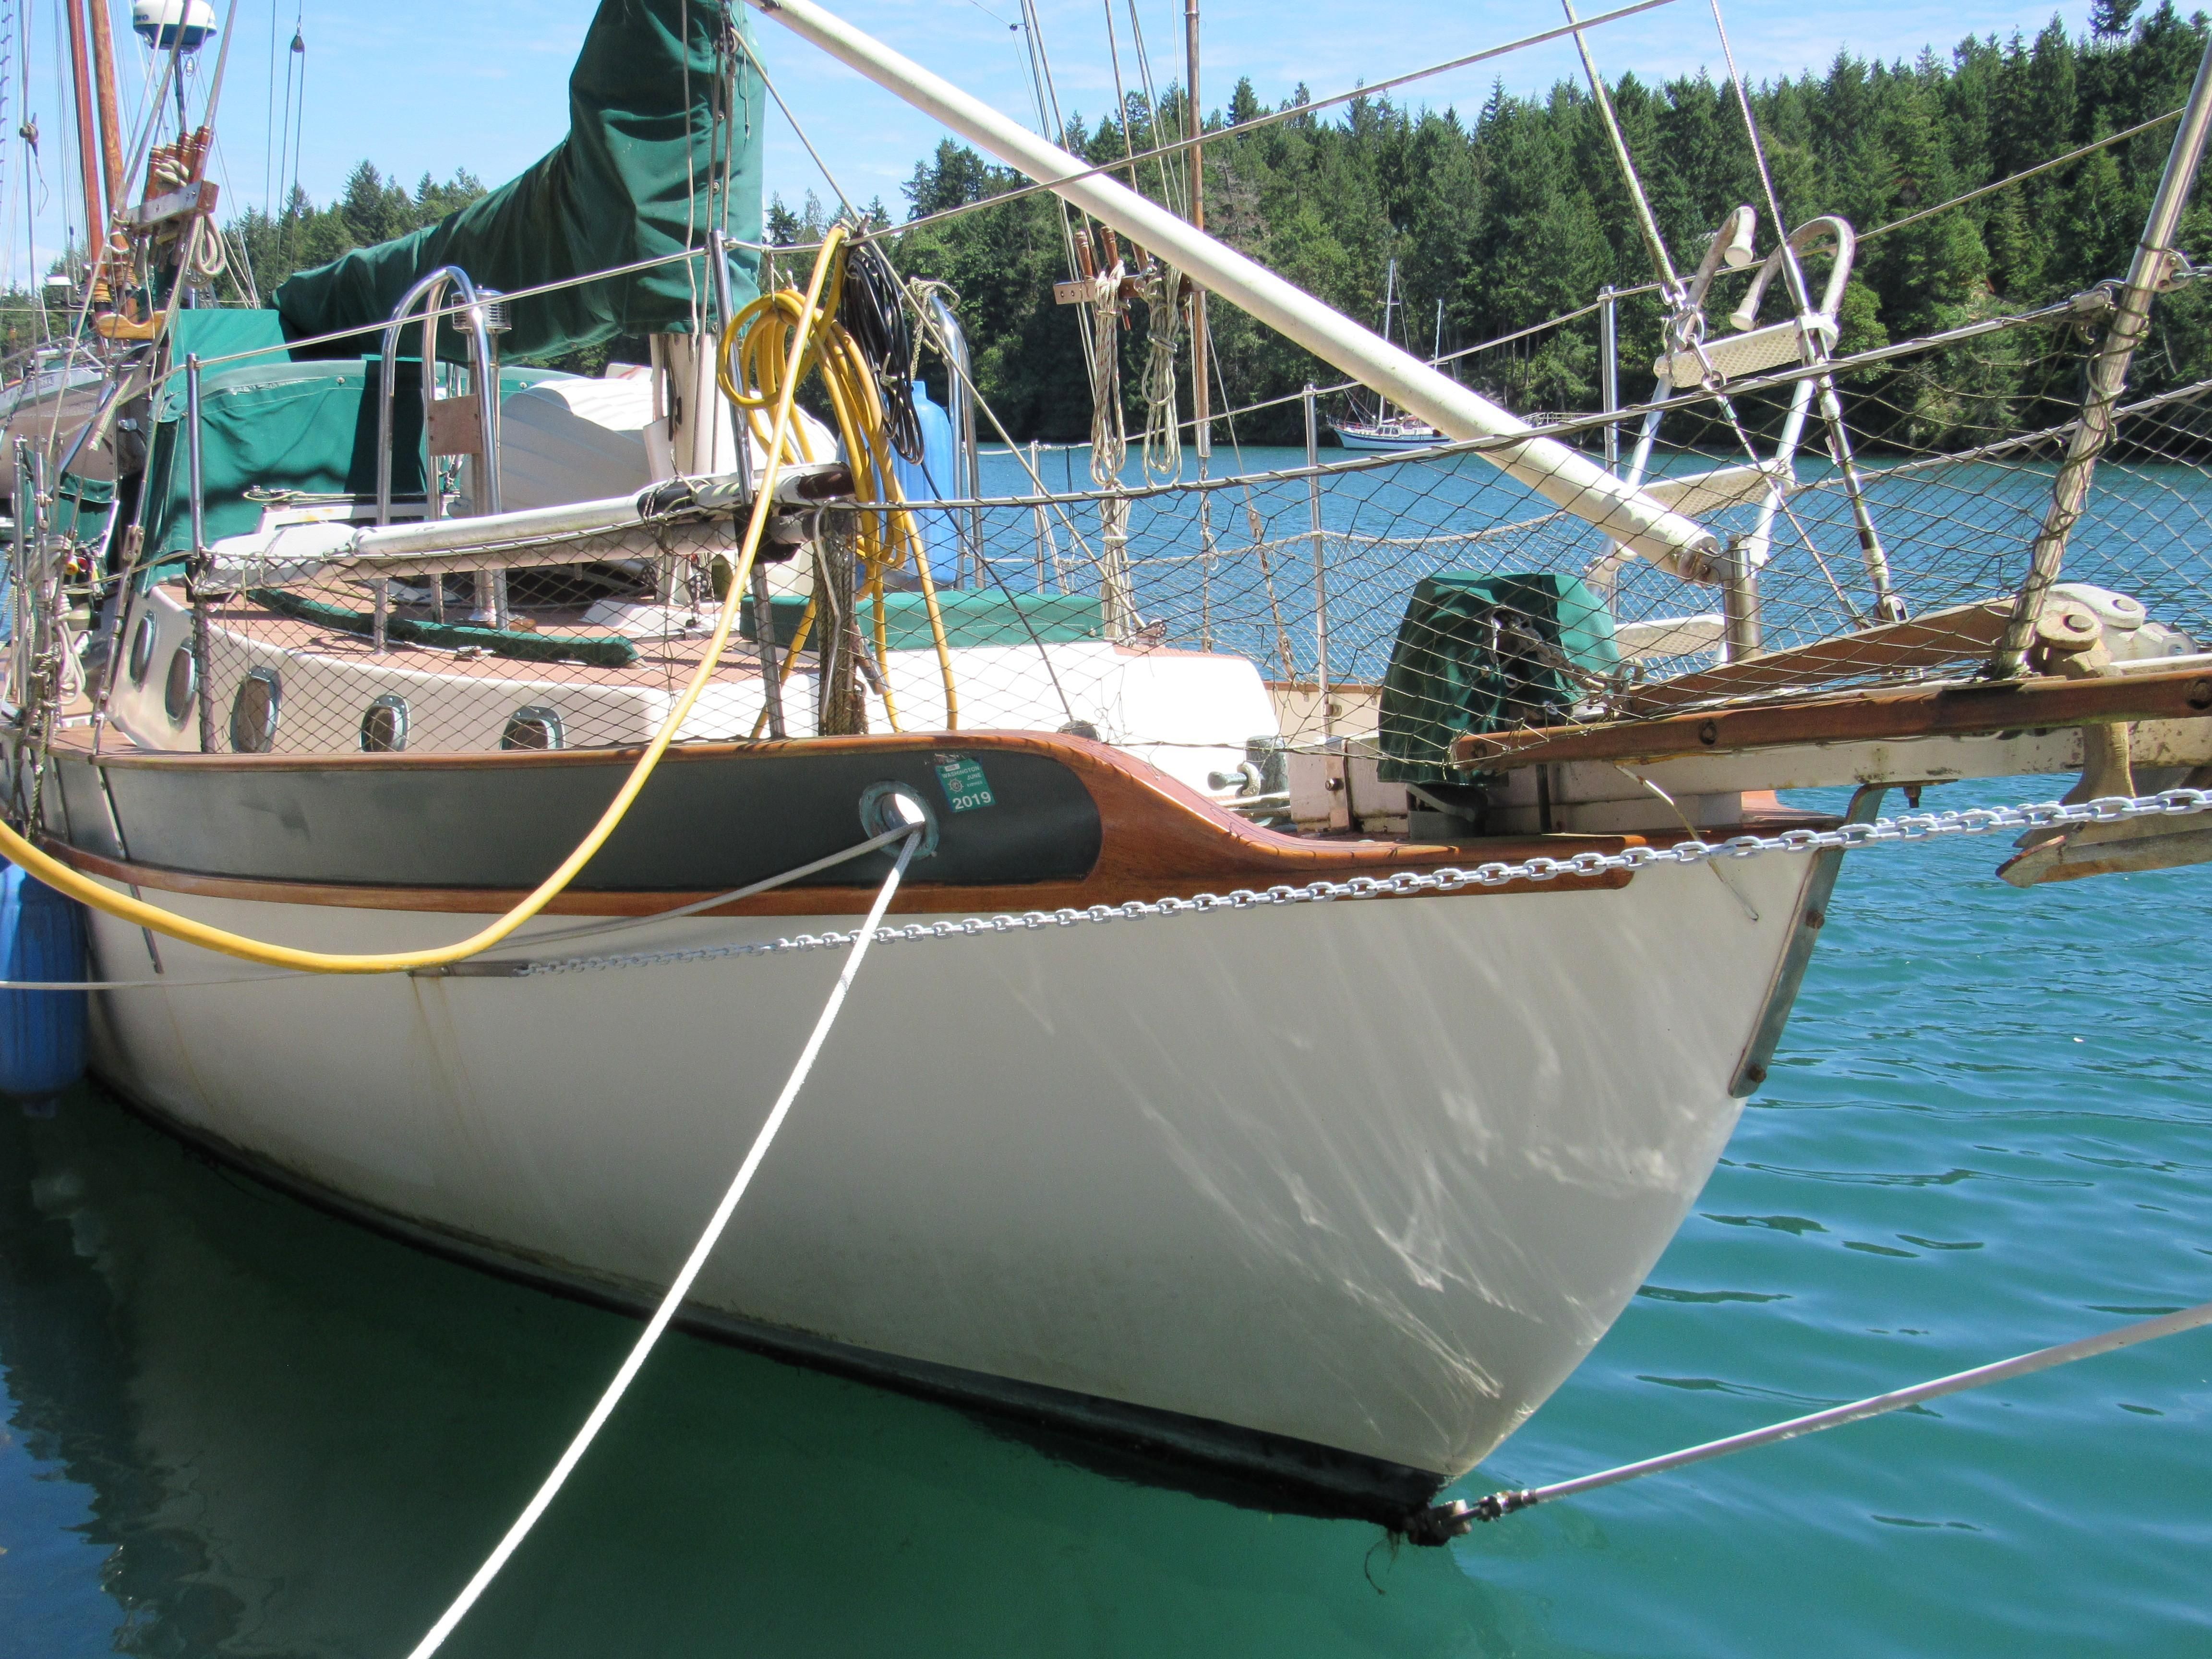 32 ft westsail sailboat for sale